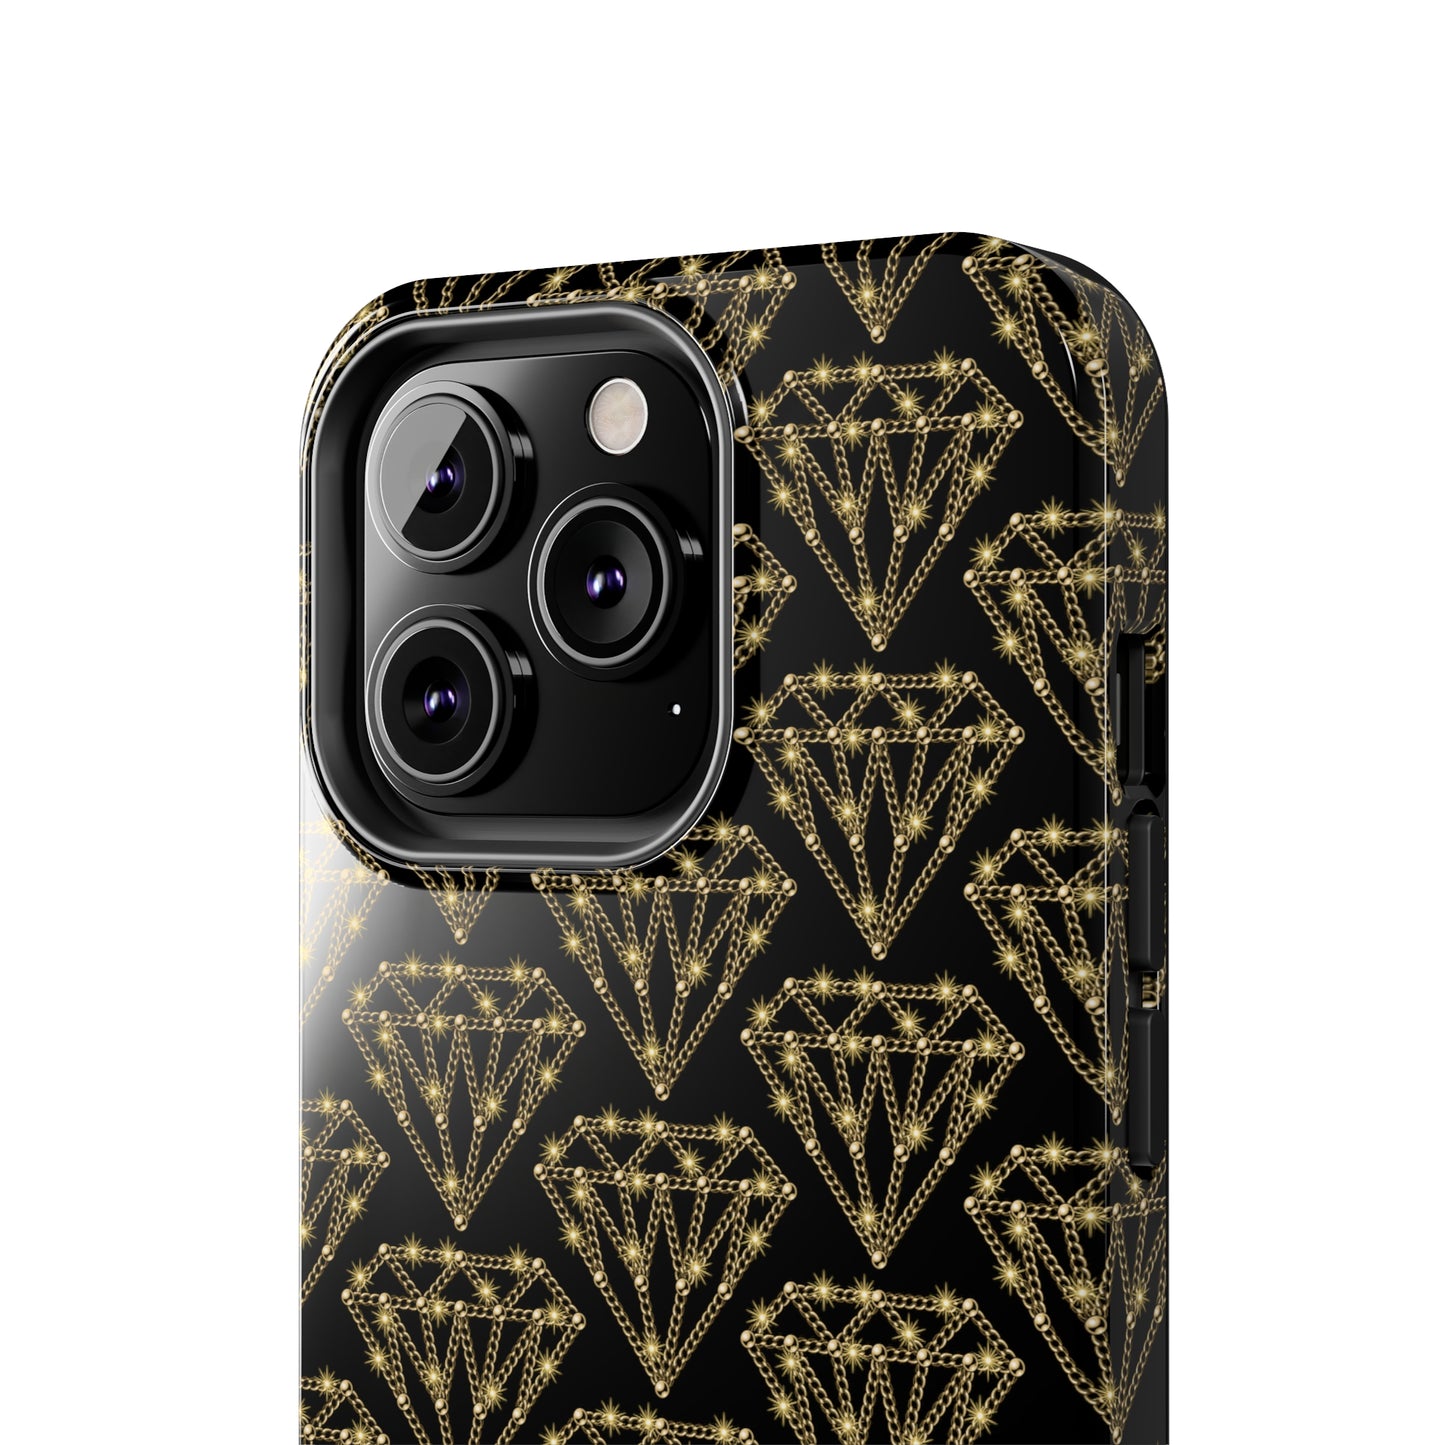 All iPhone Models: Diamonds Are A Girls Best Friend Tough Phone Cases